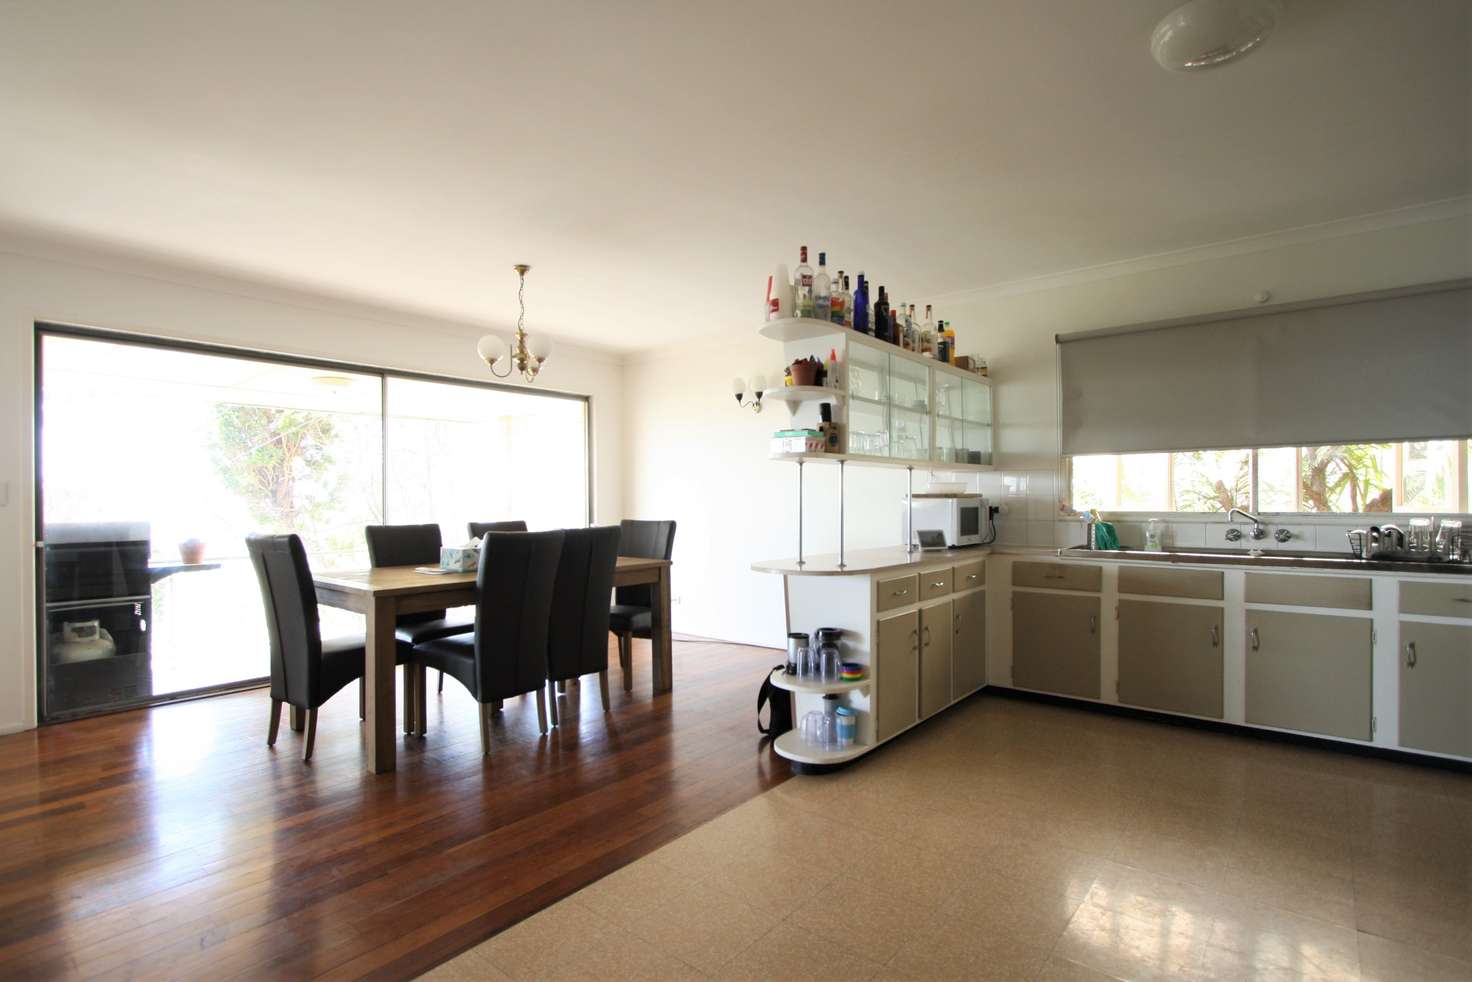 Main view of Homely house listing, 65 Kneale Street, Holland Park West QLD 4121